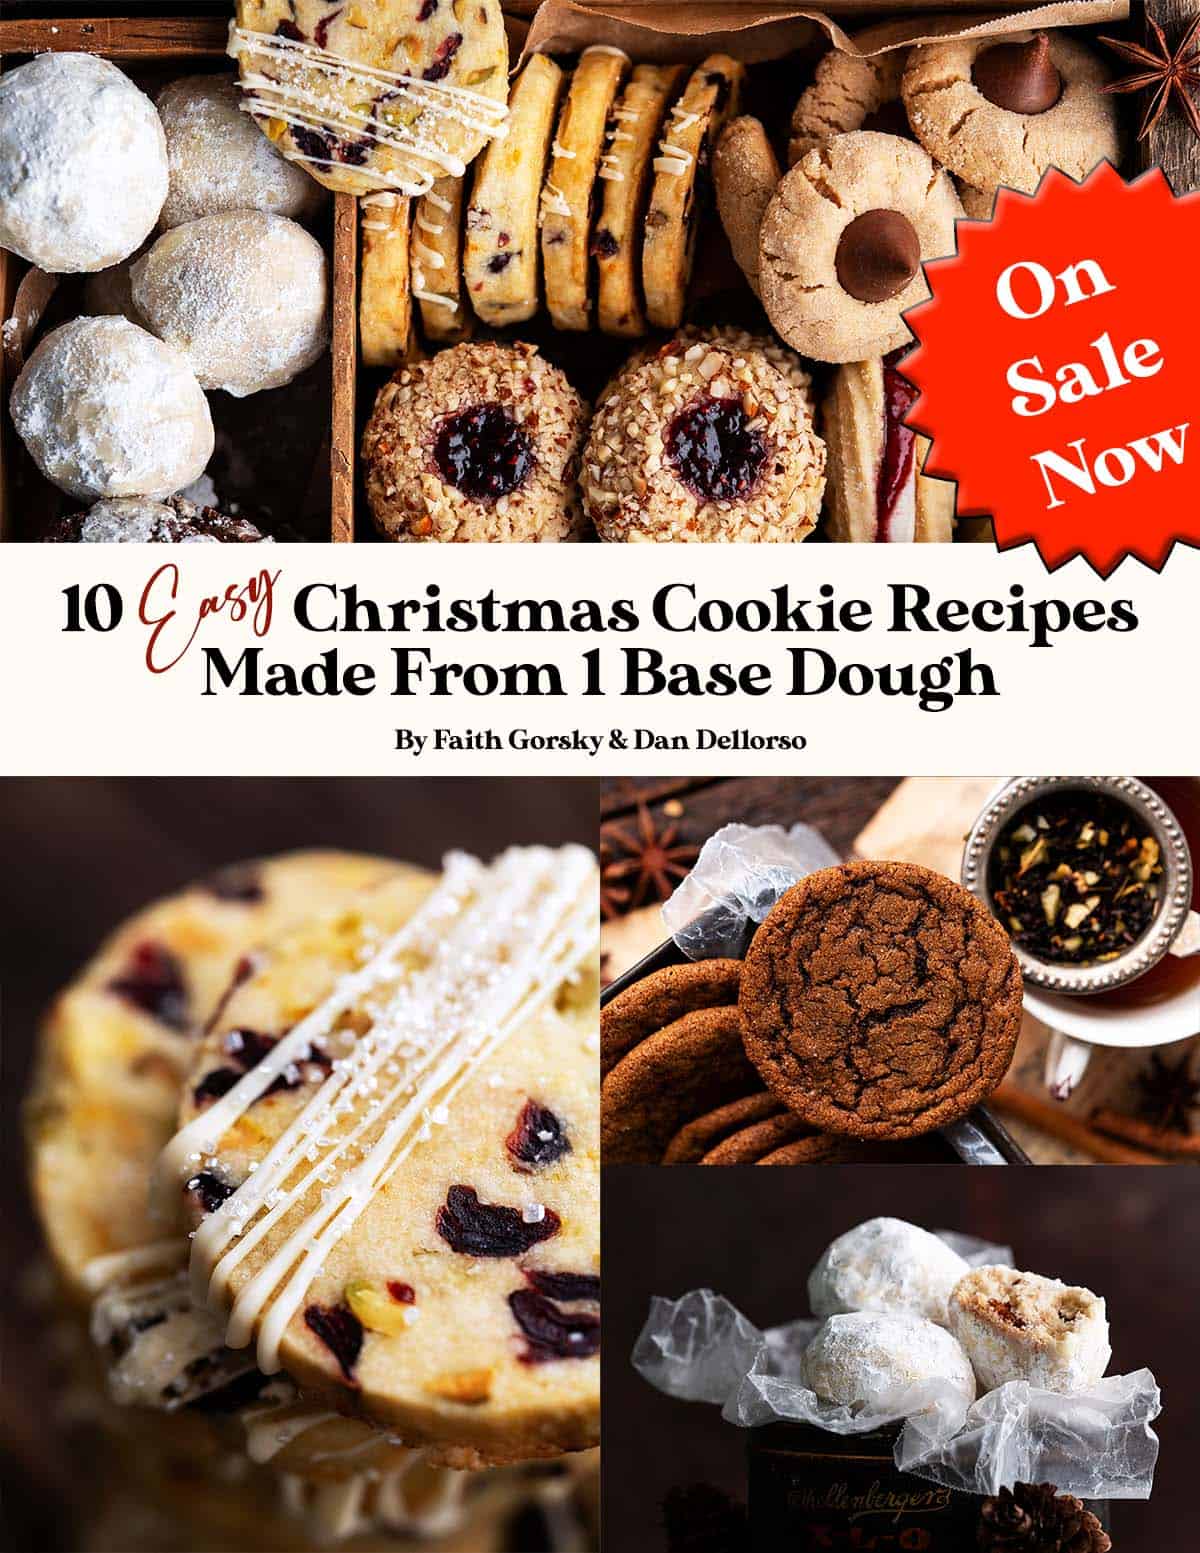 10 easy christmas cookie recipes ebook cover on sale now